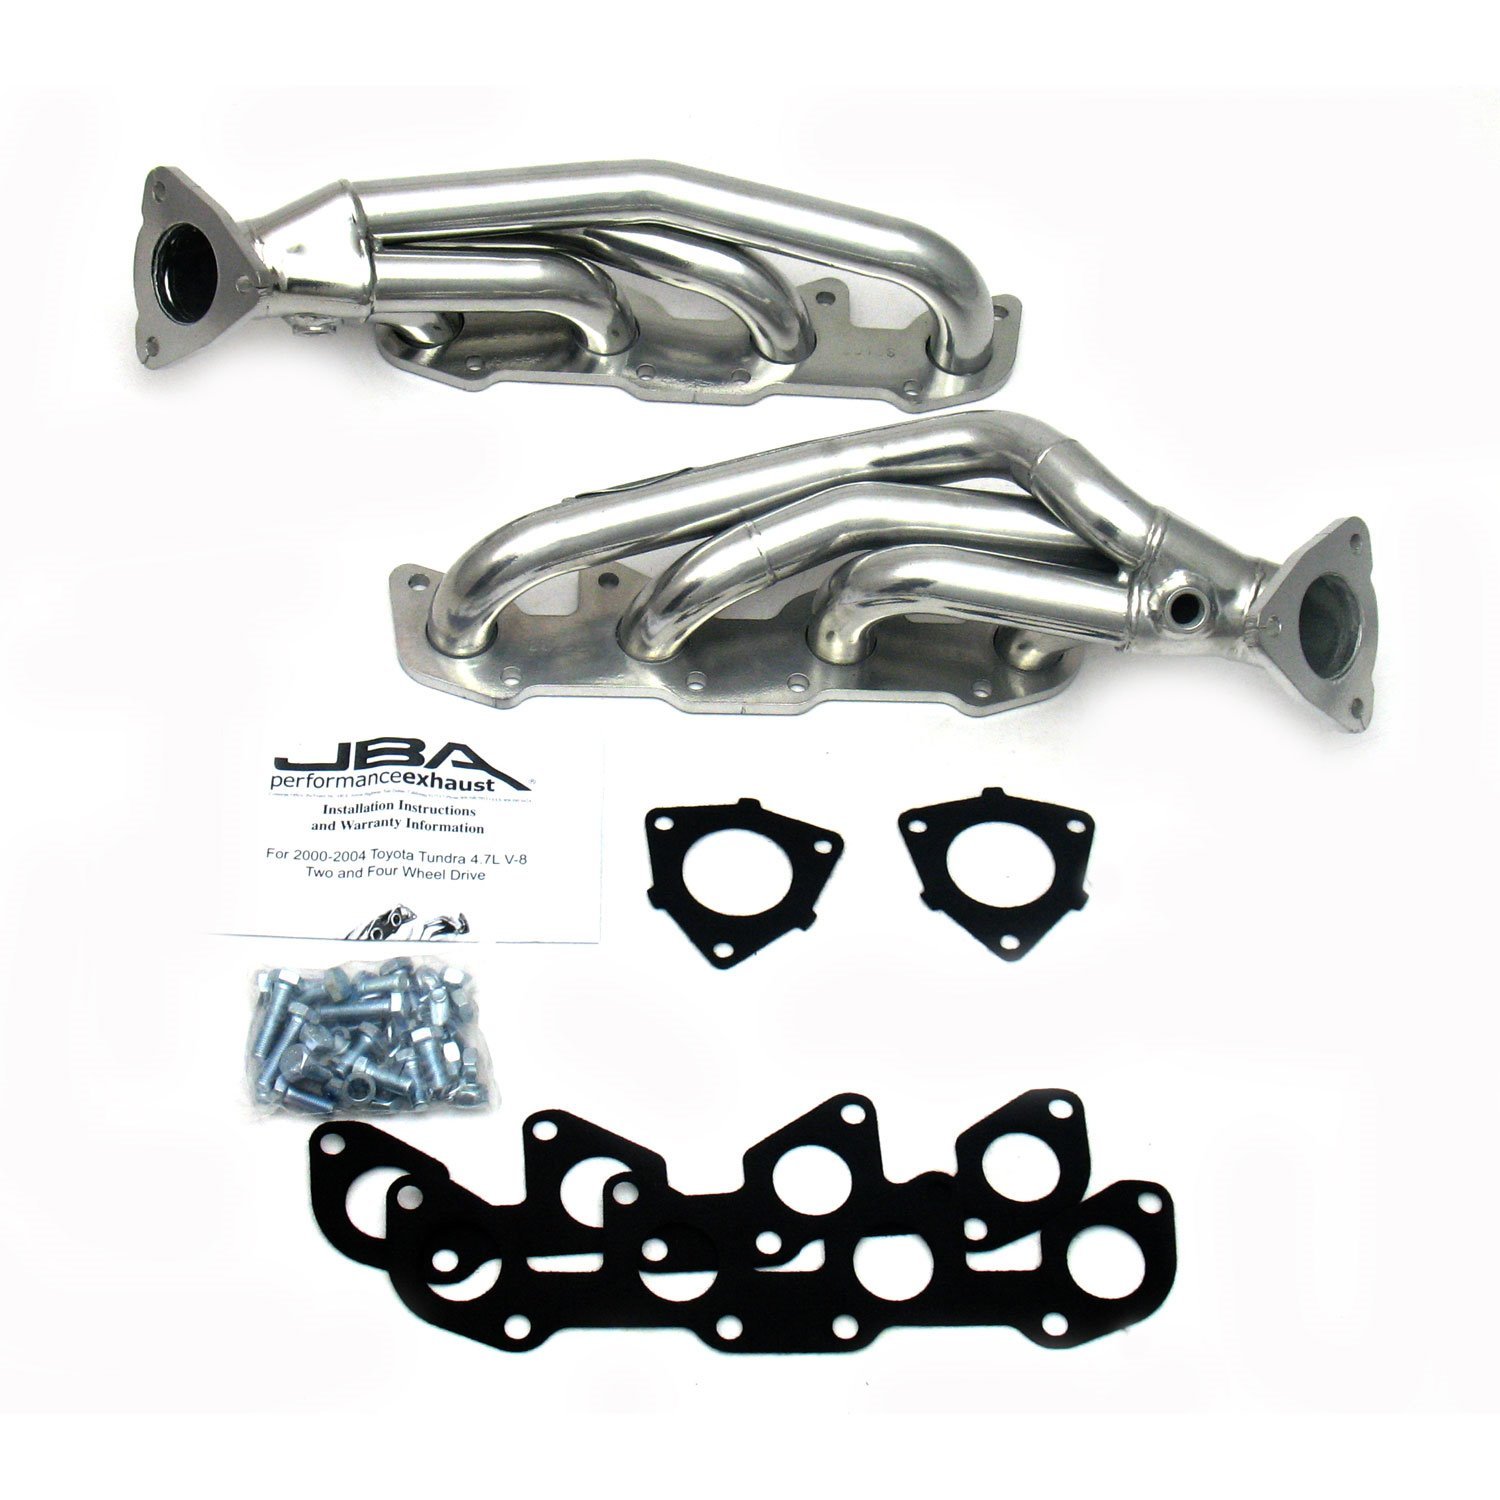 Shorty Headers 2000-2004 Toyota Tundra and Sequoia 4.7L